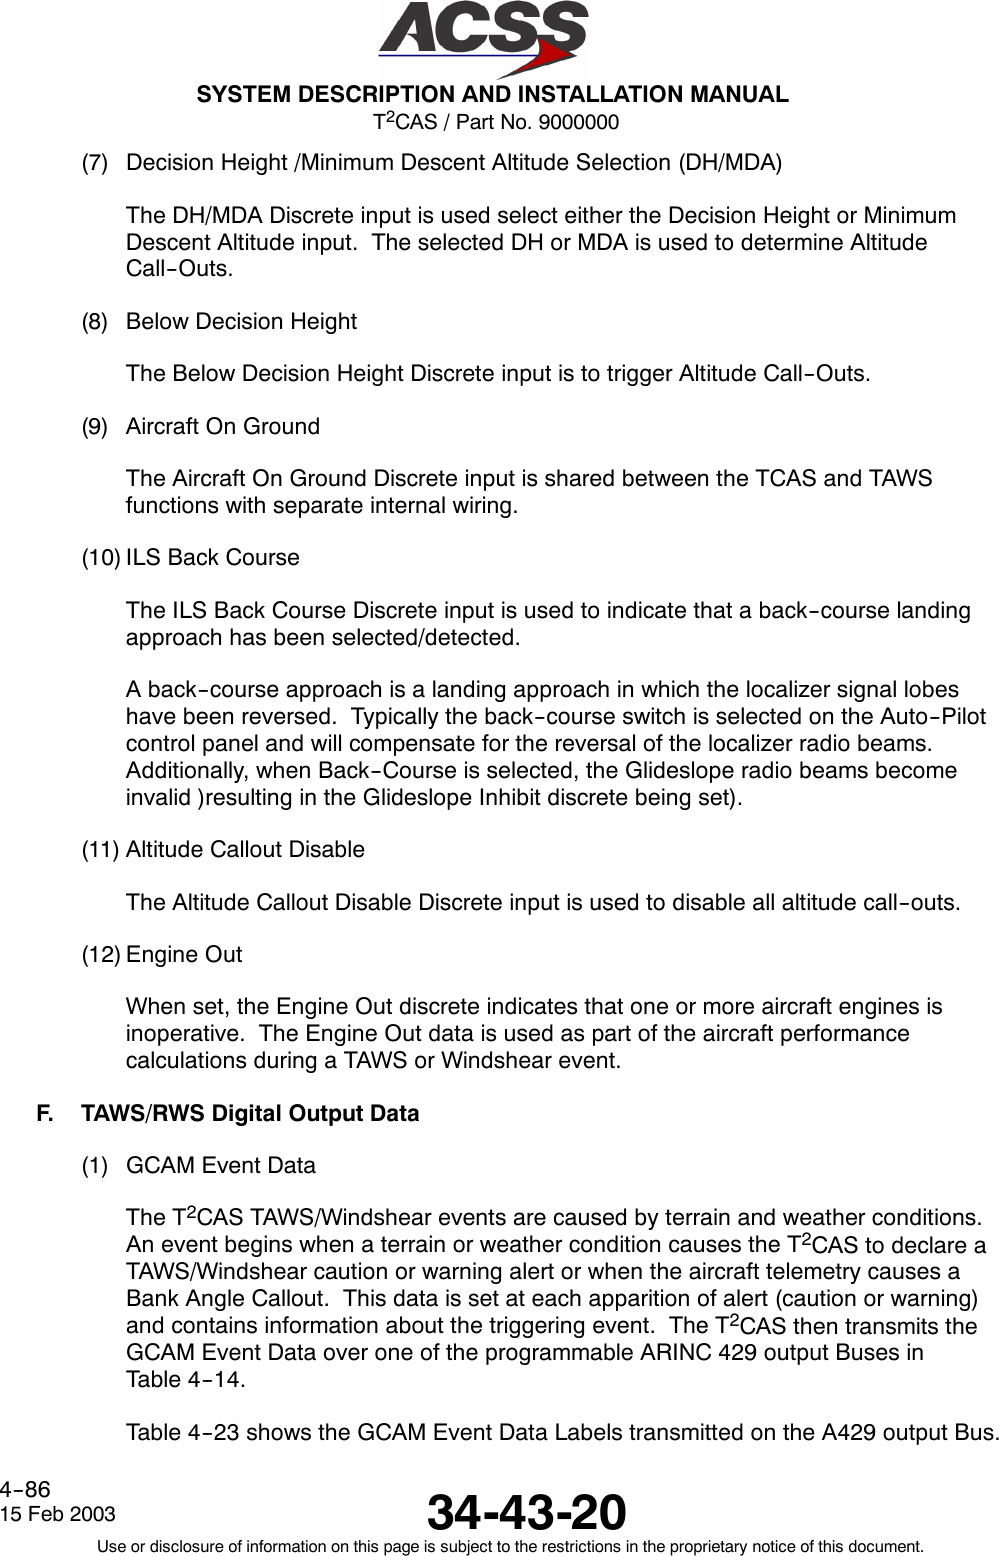 T2CAS / Part No. 9000000SYSTEM DESCRIPTION AND INSTALLATION MANUAL34-43-2015 Feb 2003Use or disclosure of information on this page is subject to the restrictions in the proprietary notice of this document.4--86(7) Decision Height /Minimum Descent Altitude Selection (DH/MDA)The DH/MDA Discrete input is used select either the Decision Height or MinimumDescent Altitude input. The selected DH or MDA is used to determine AltitudeCall--Outs.(8) Below Decision HeightThe Below Decision Height Discrete input is to trigger Altitude Call--Outs.(9) Aircraft On GroundThe Aircraft On Ground Discrete input is shared between the TCAS and TAWSfunctions with separate internal wiring.(10) ILS Back CourseThe ILS Back Course Discrete input is used to indicate that a back--course landingapproach has been selected/detected.A back--course approach is a landing approach in which the localizer signal lobeshave been reversed. Typically the back--course switch is selected on the Auto--Pilotcontrol panel and will compensate for the reversal of the localizer radio beams.Additionally, when Back--Course is selected, the Glideslope radio beams becomeinvalid )resulting in the Glideslope Inhibit discrete being set).(11) Altitude Callout DisableThe Altitude Callout Disable Discrete input is used to disable all altitude call--outs.(12) Engine OutWhen set, the Engine Out discrete indicates that one or more aircraft engines isinoperative. The Engine Out data is used as part of the aircraft performancecalculations during a TAWS or Windshear event.F. TAWS/RWS Digital Output Data(1) GCAM Event DataThe T2CAS TAWS/Windshear events are caused by terrain and weather conditions.An event begins when a terrain or weather condition causes the T2CAS to declare aTAWS/Windshear caution or warning alert or when the aircraft telemetry causes aBank Angle Callout. This data is set at each apparition of alert (caution or warning)and contains information about the triggering event. The T2CAS then transmits theGCAM Event Data over one of the programmable ARINC 429 output Buses inTable 4--14.Table 4--23 shows the GCAM Event Data Labels transmitted on the A429 output Bus.